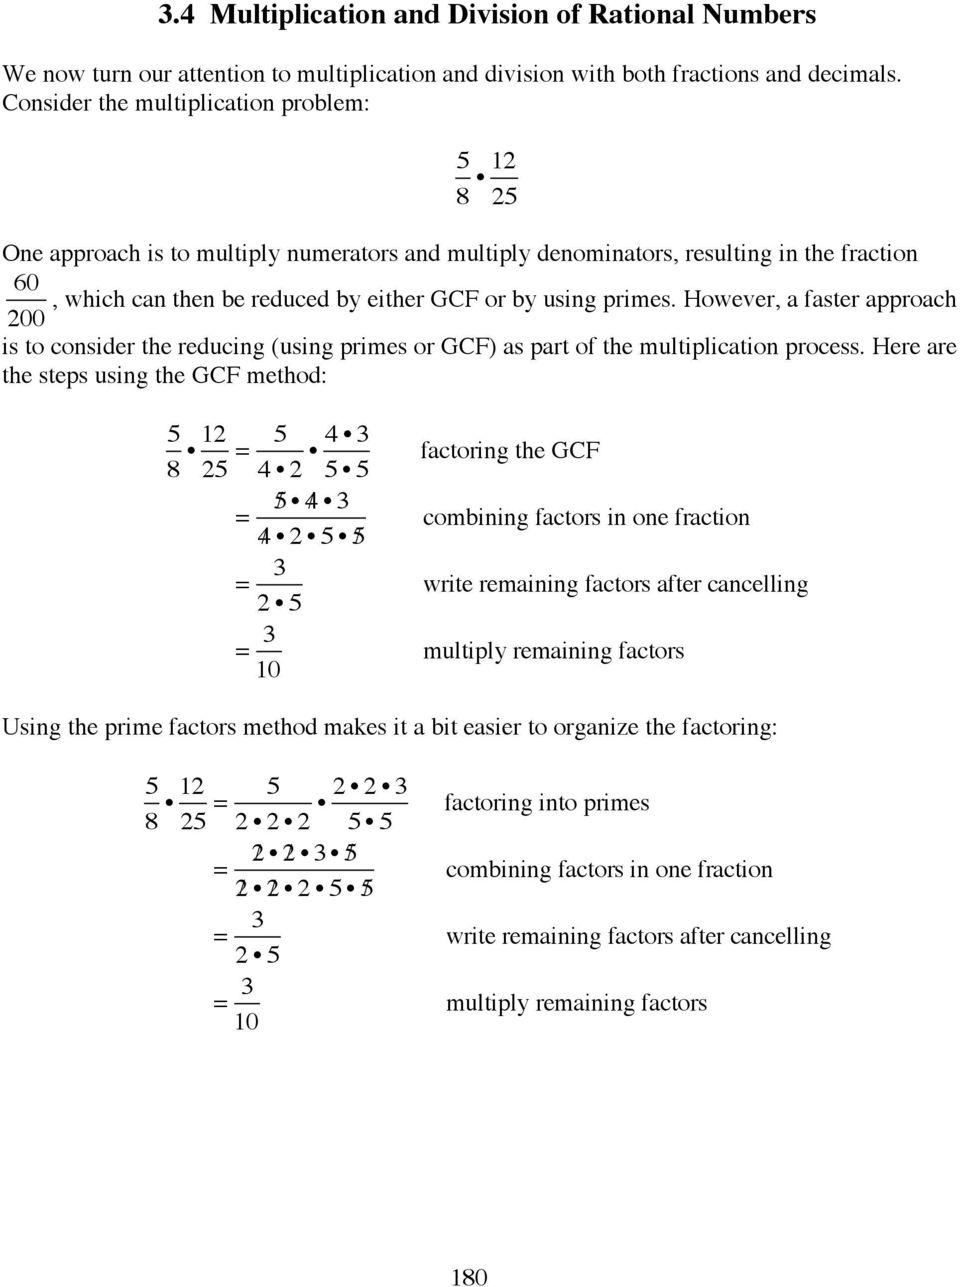 either GCF or by using primes. However, a faster approach 200 is to consider the reducing (using primes or GCF) as part of the multiplication process.